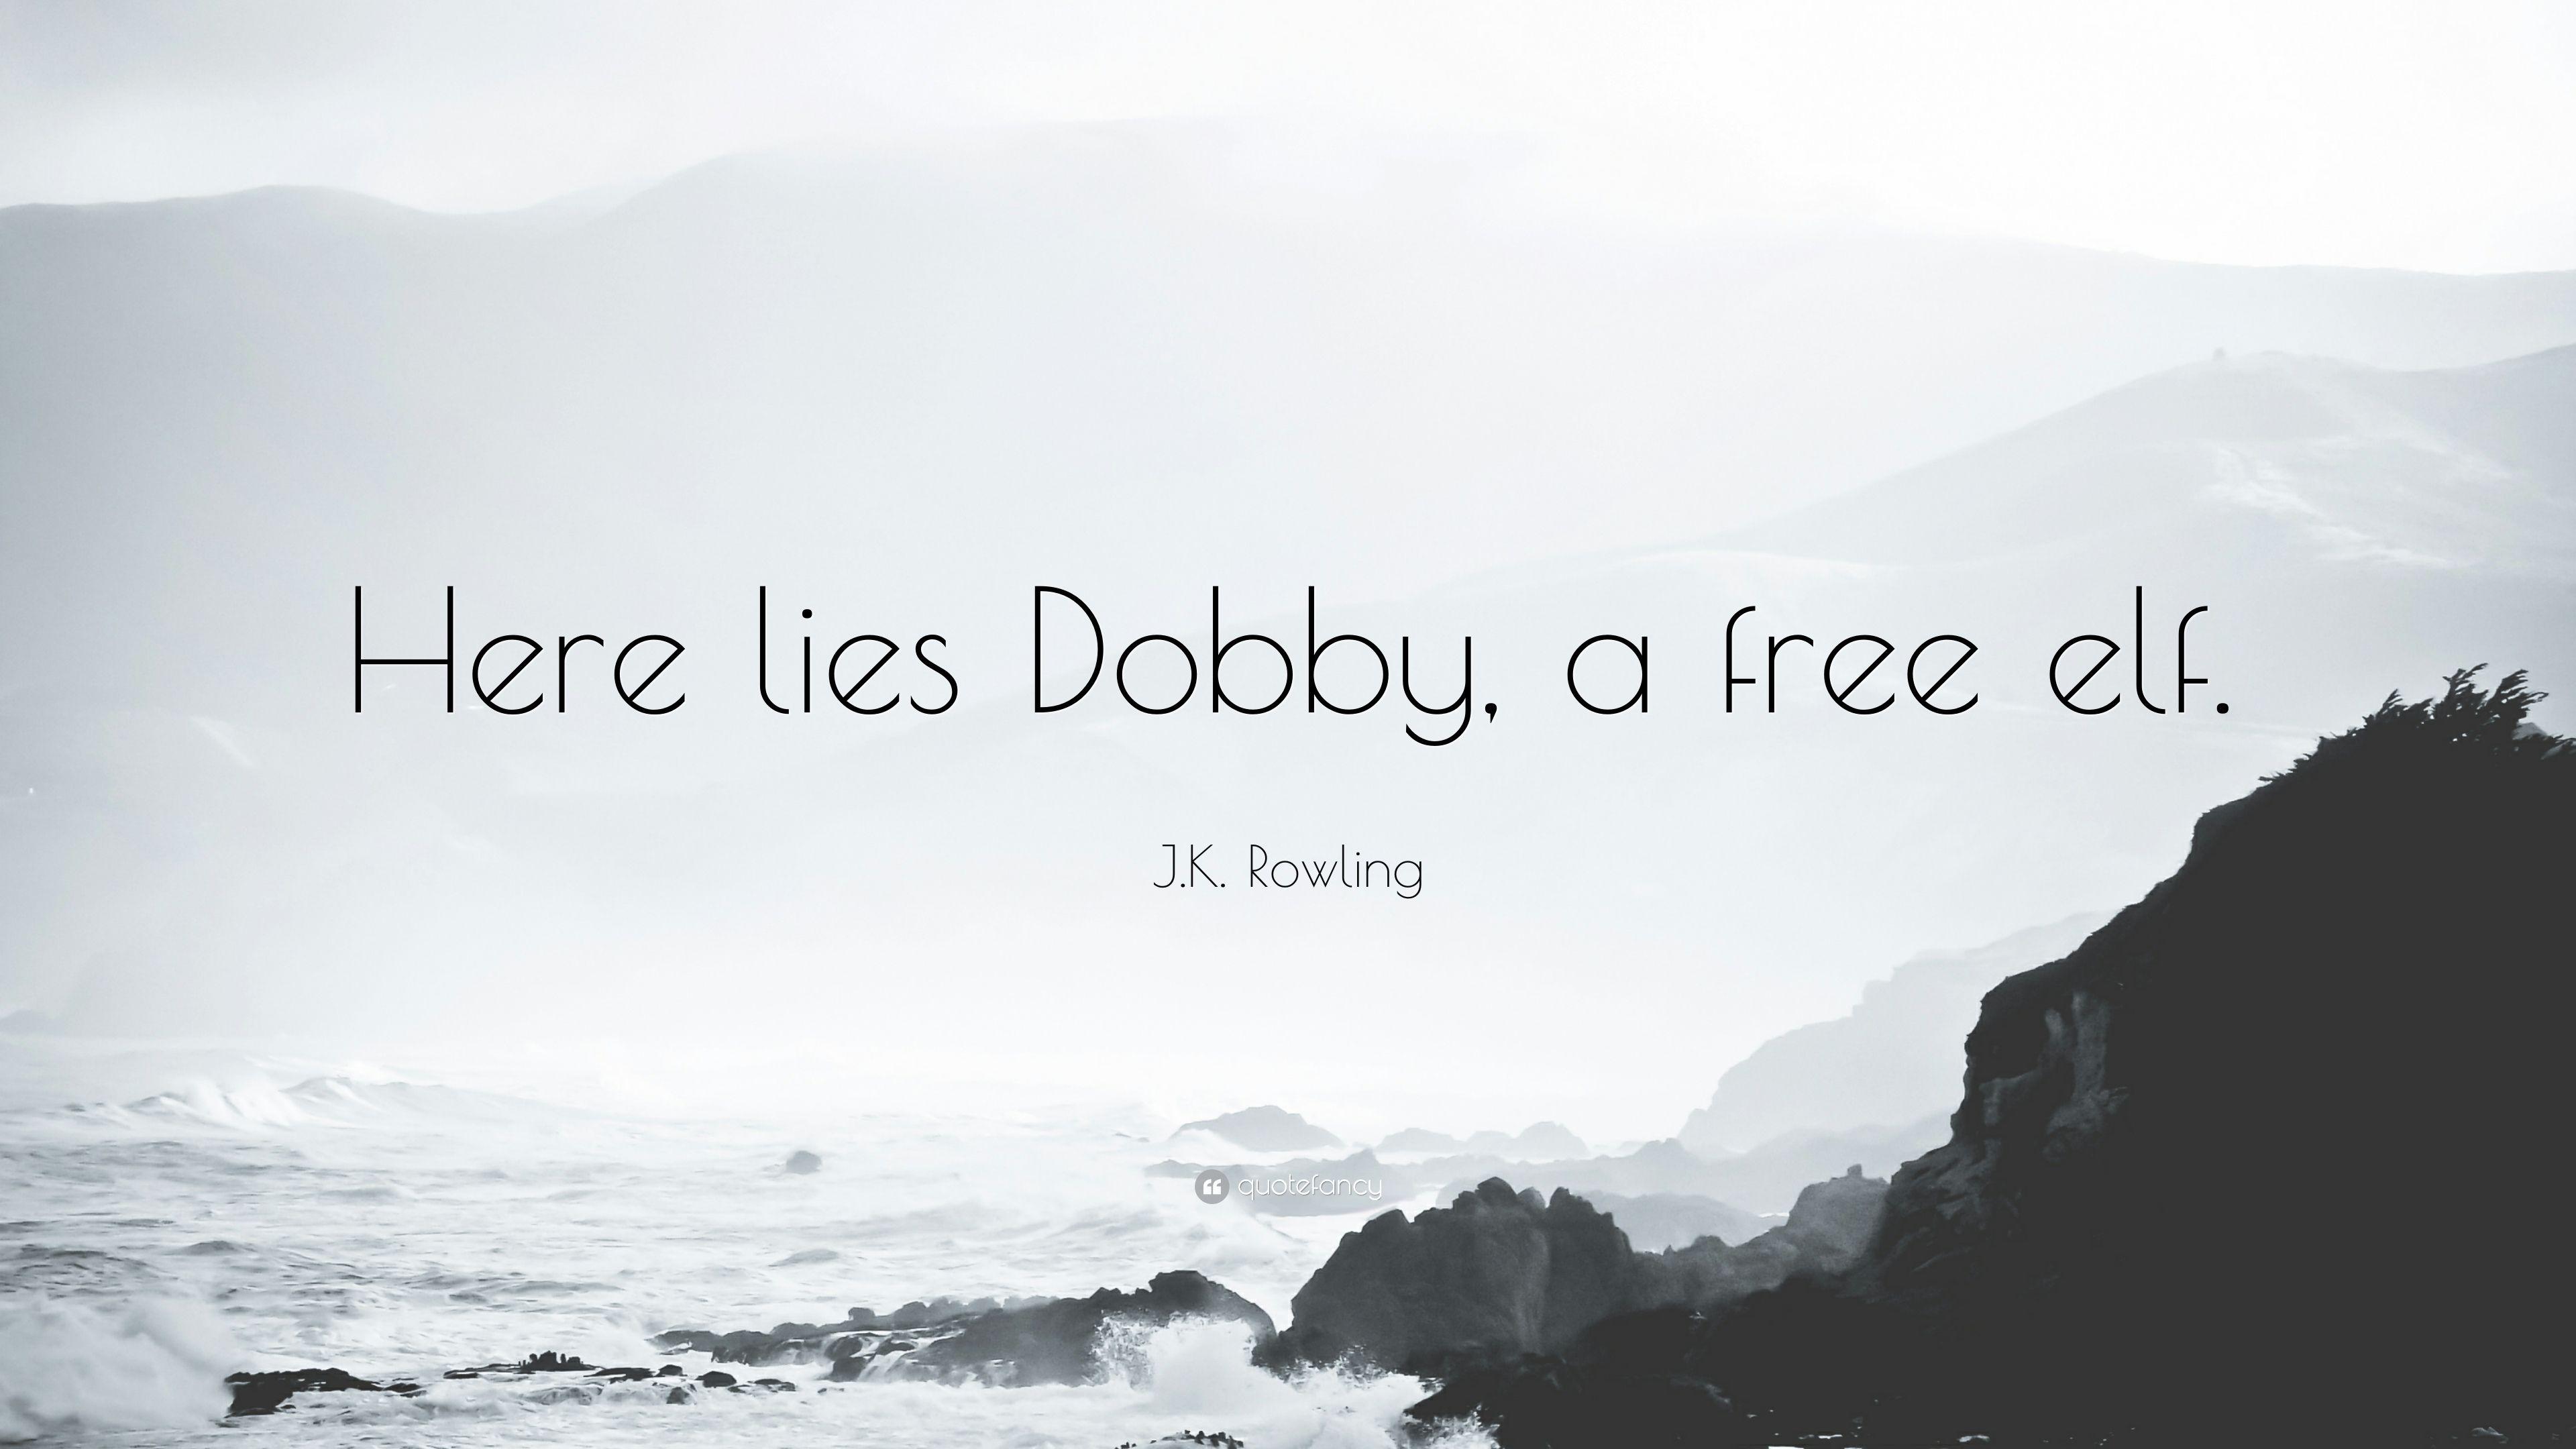 J.K. Rowling Quote: “Here lies Dobby, a free elf.” 12 wallpaper